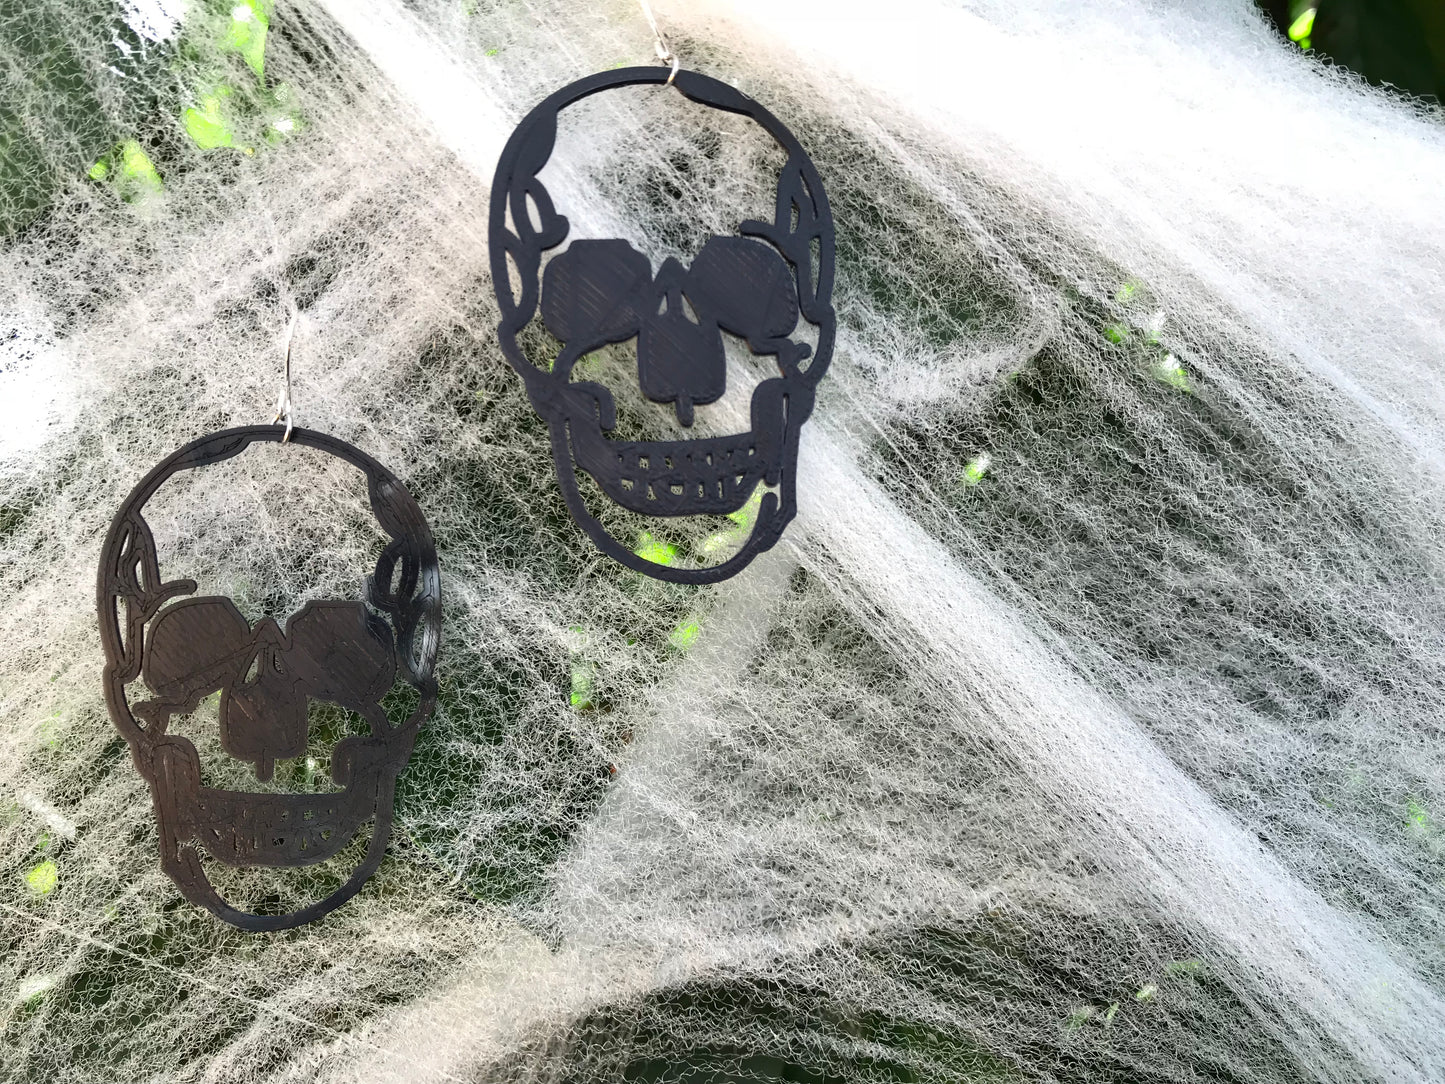 Hanging off of fake cobwebs for Halloween are two large black skull earrings. They are realistic in their shape and could be considered edgy or creepy.